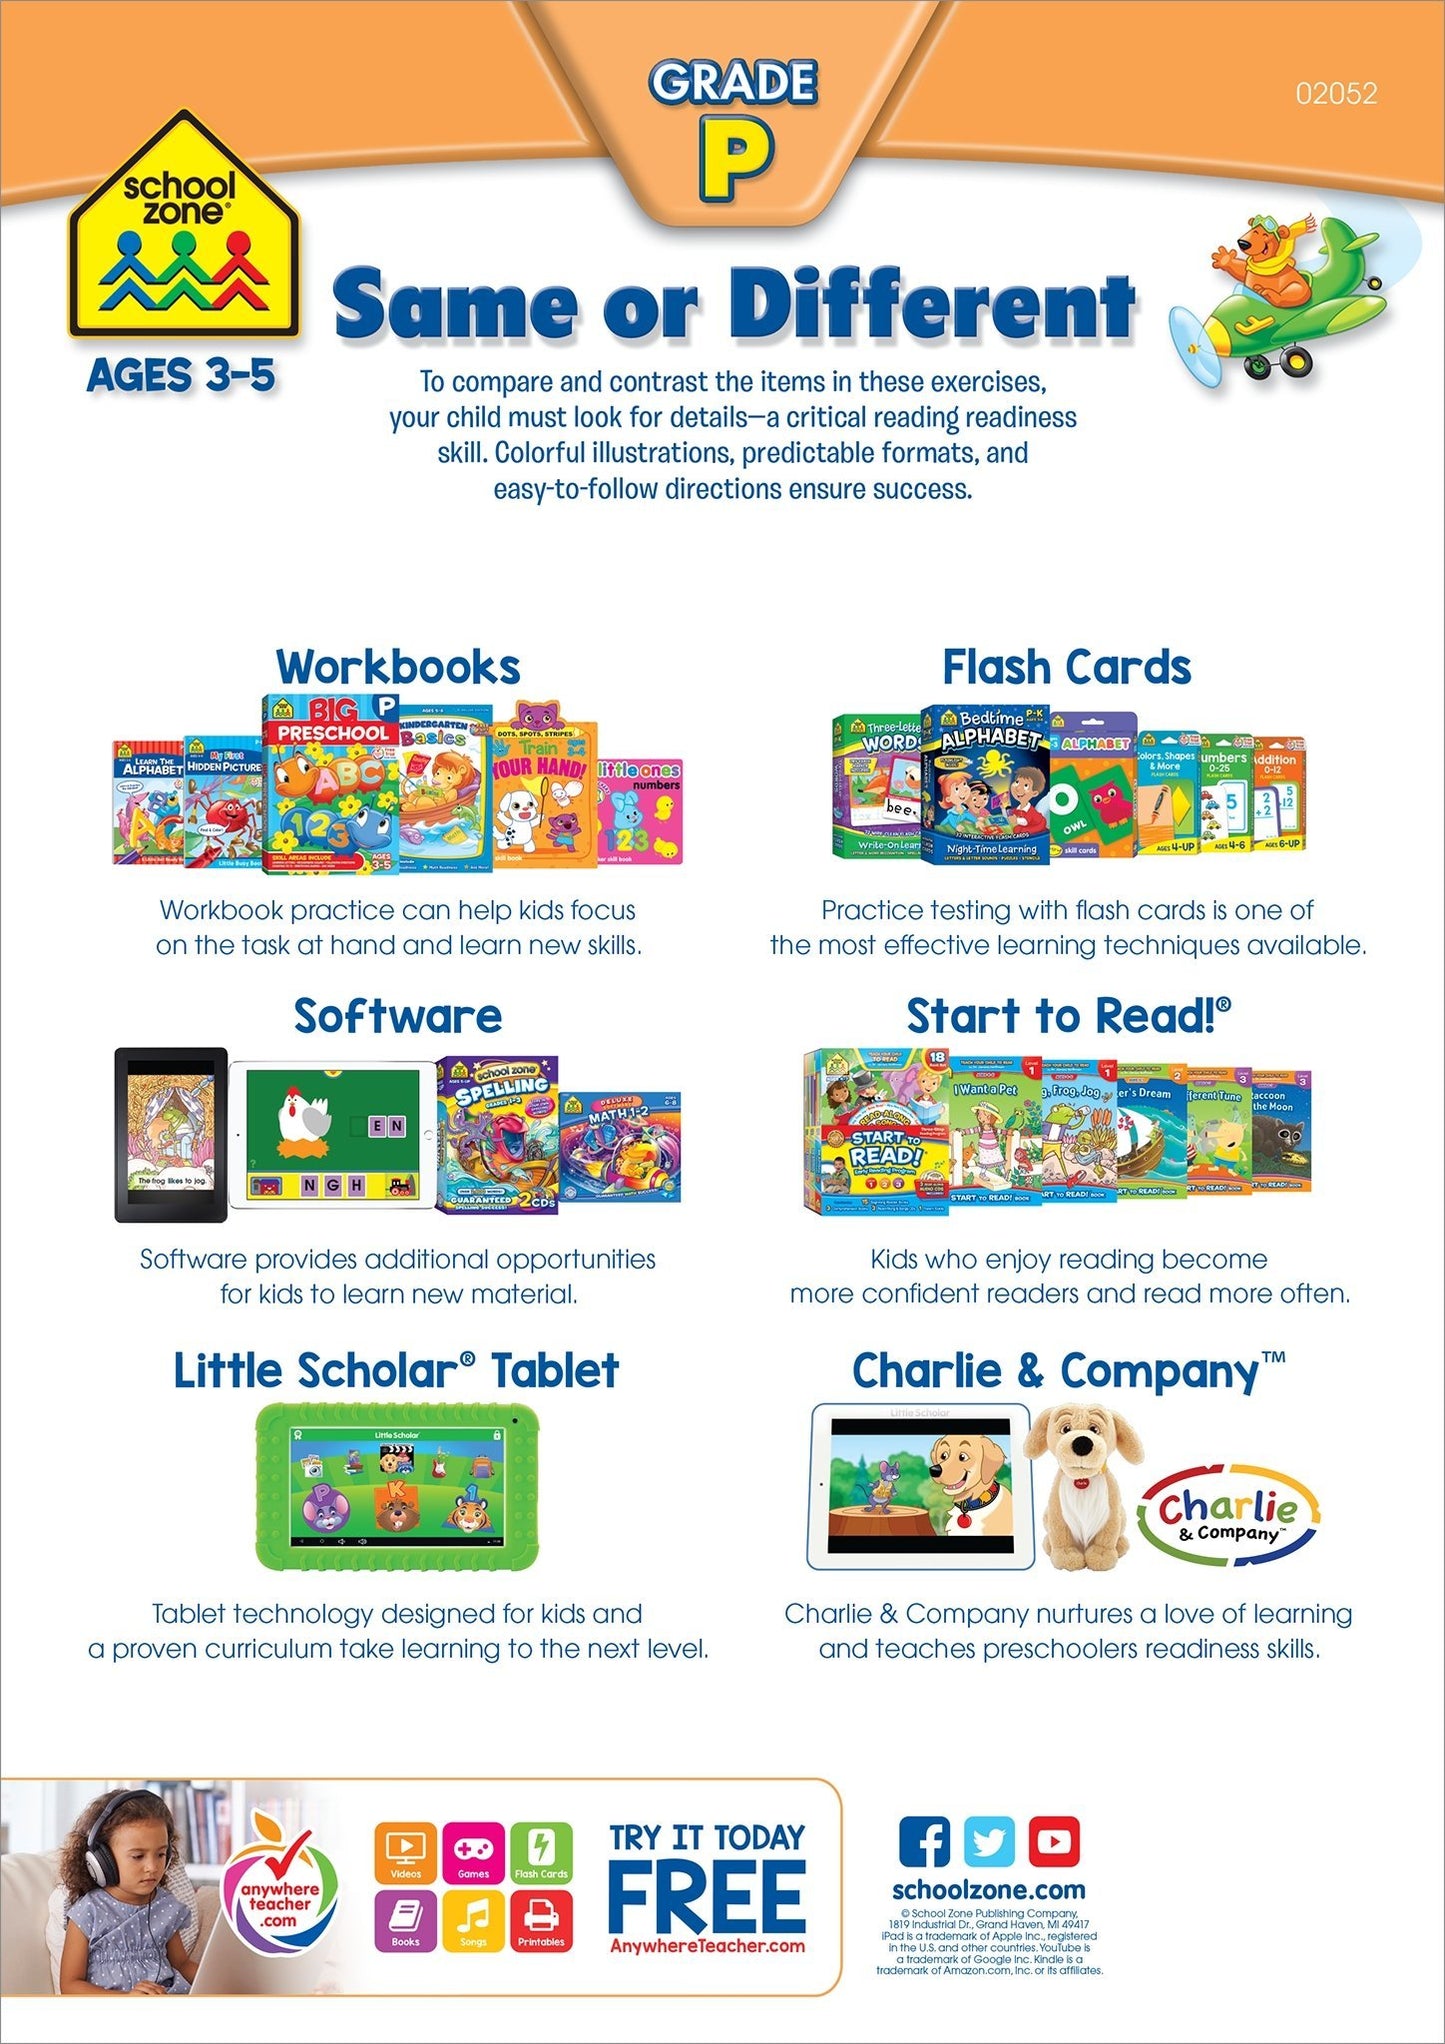 Same or Different Workbook - 32 Pages, Preschool to Kindergarten, Words, Letters, Colors, Matching, Compare and Contrast